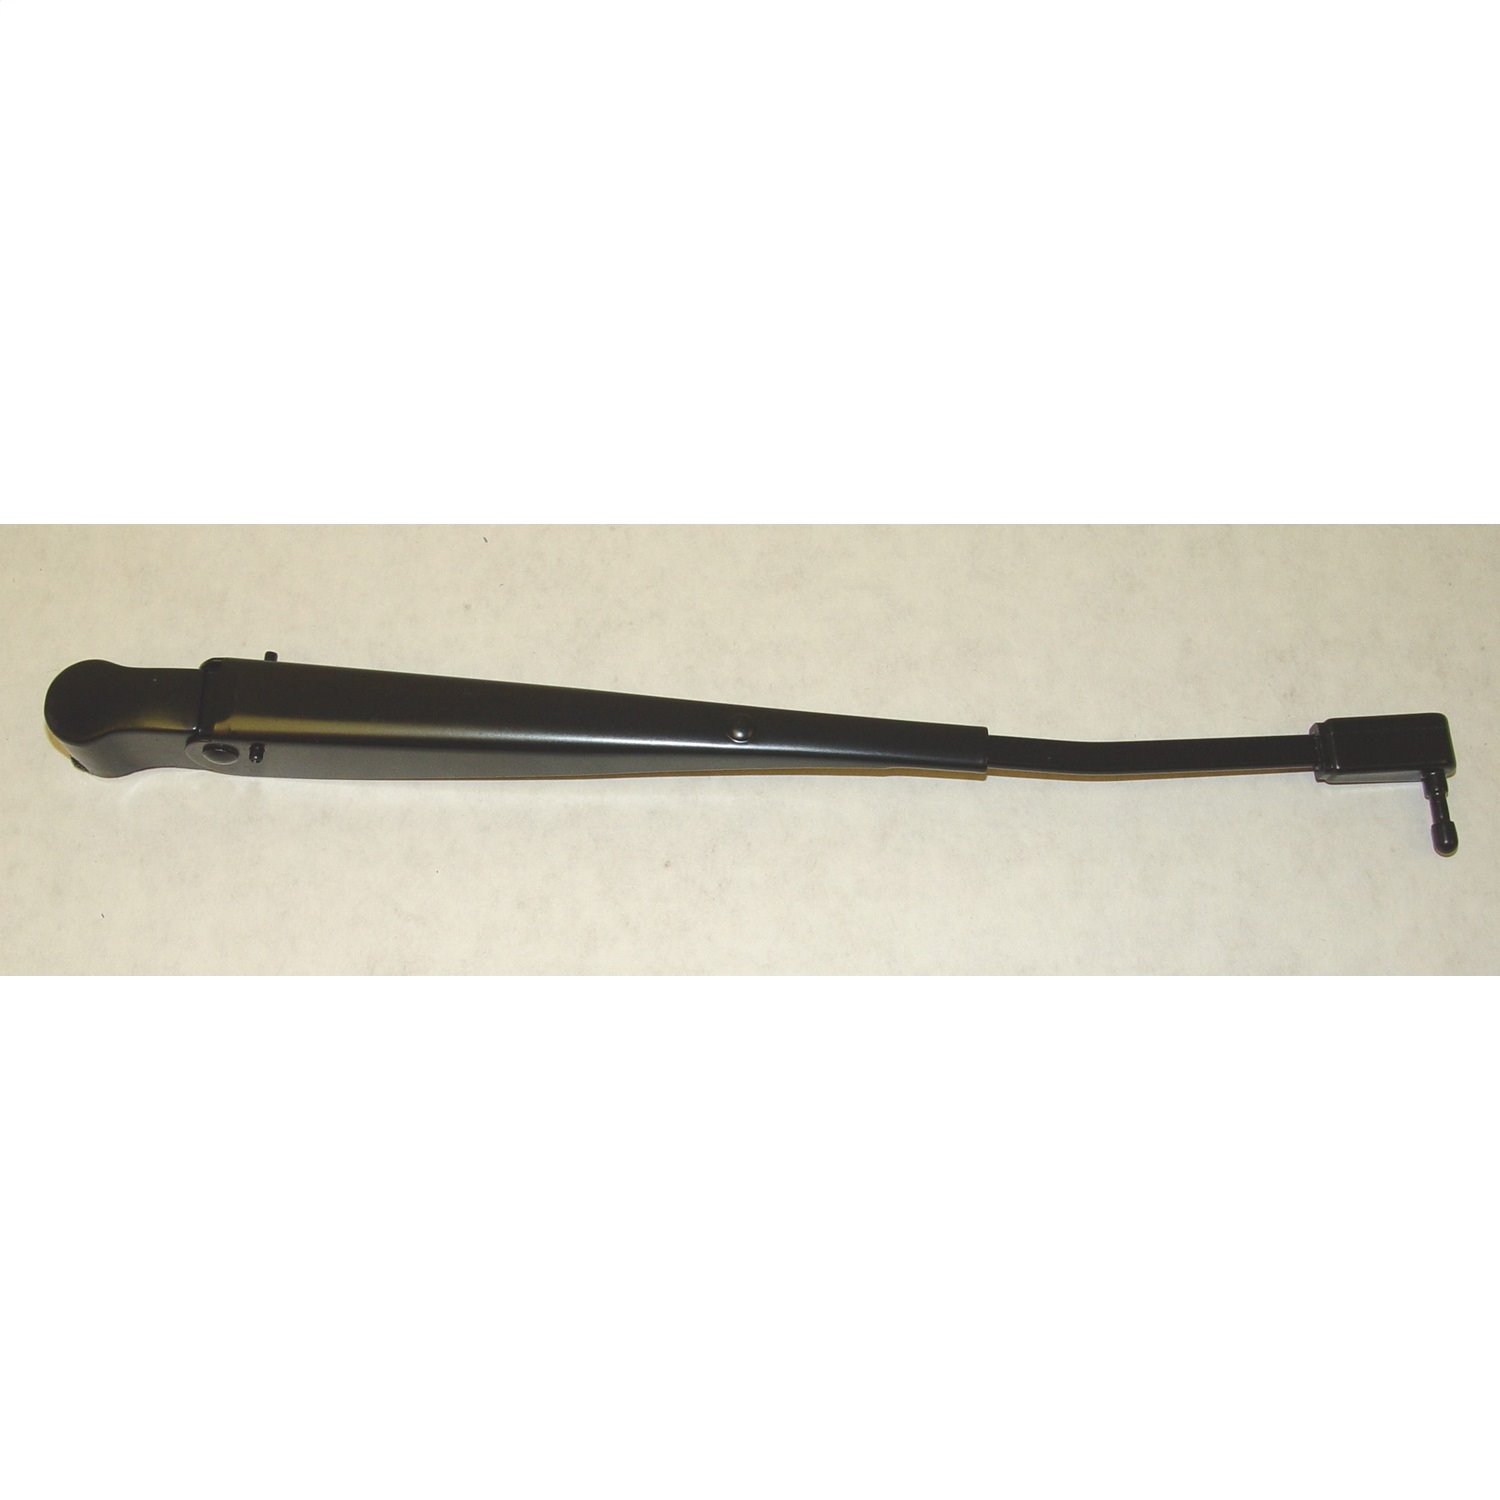 Replacement windshield wiper arm from Omix-ADA, Fits 87-95